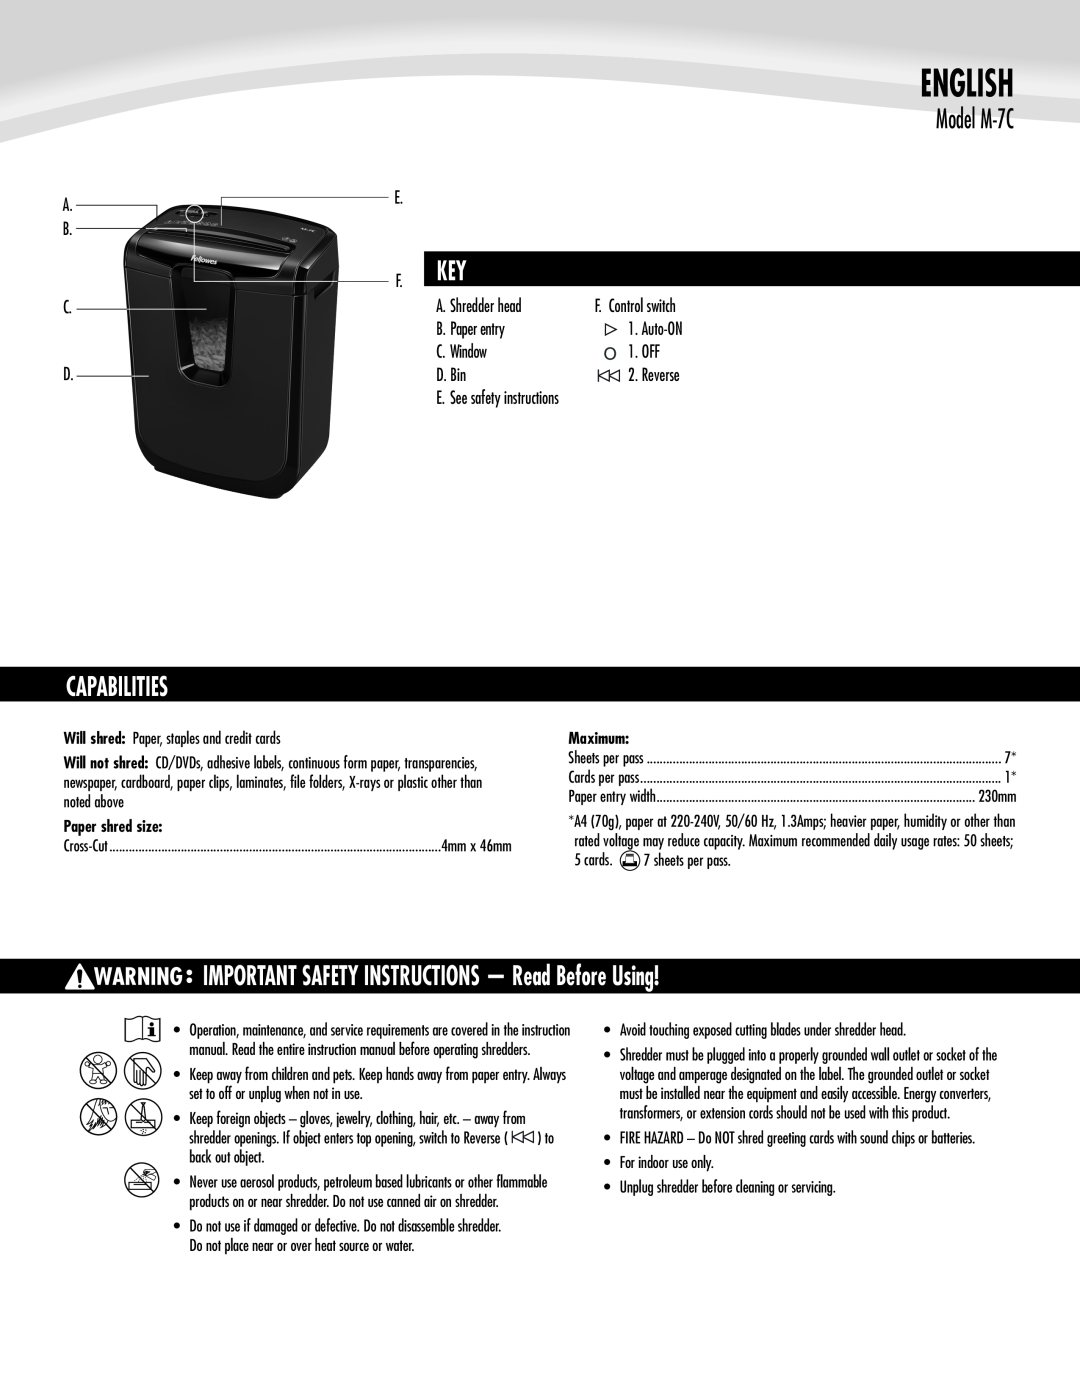 Fellowes manual IMPORTANT SAFETY INSTRUCTIONS - Read Before Using, English, Model M-7C, Capabilities 